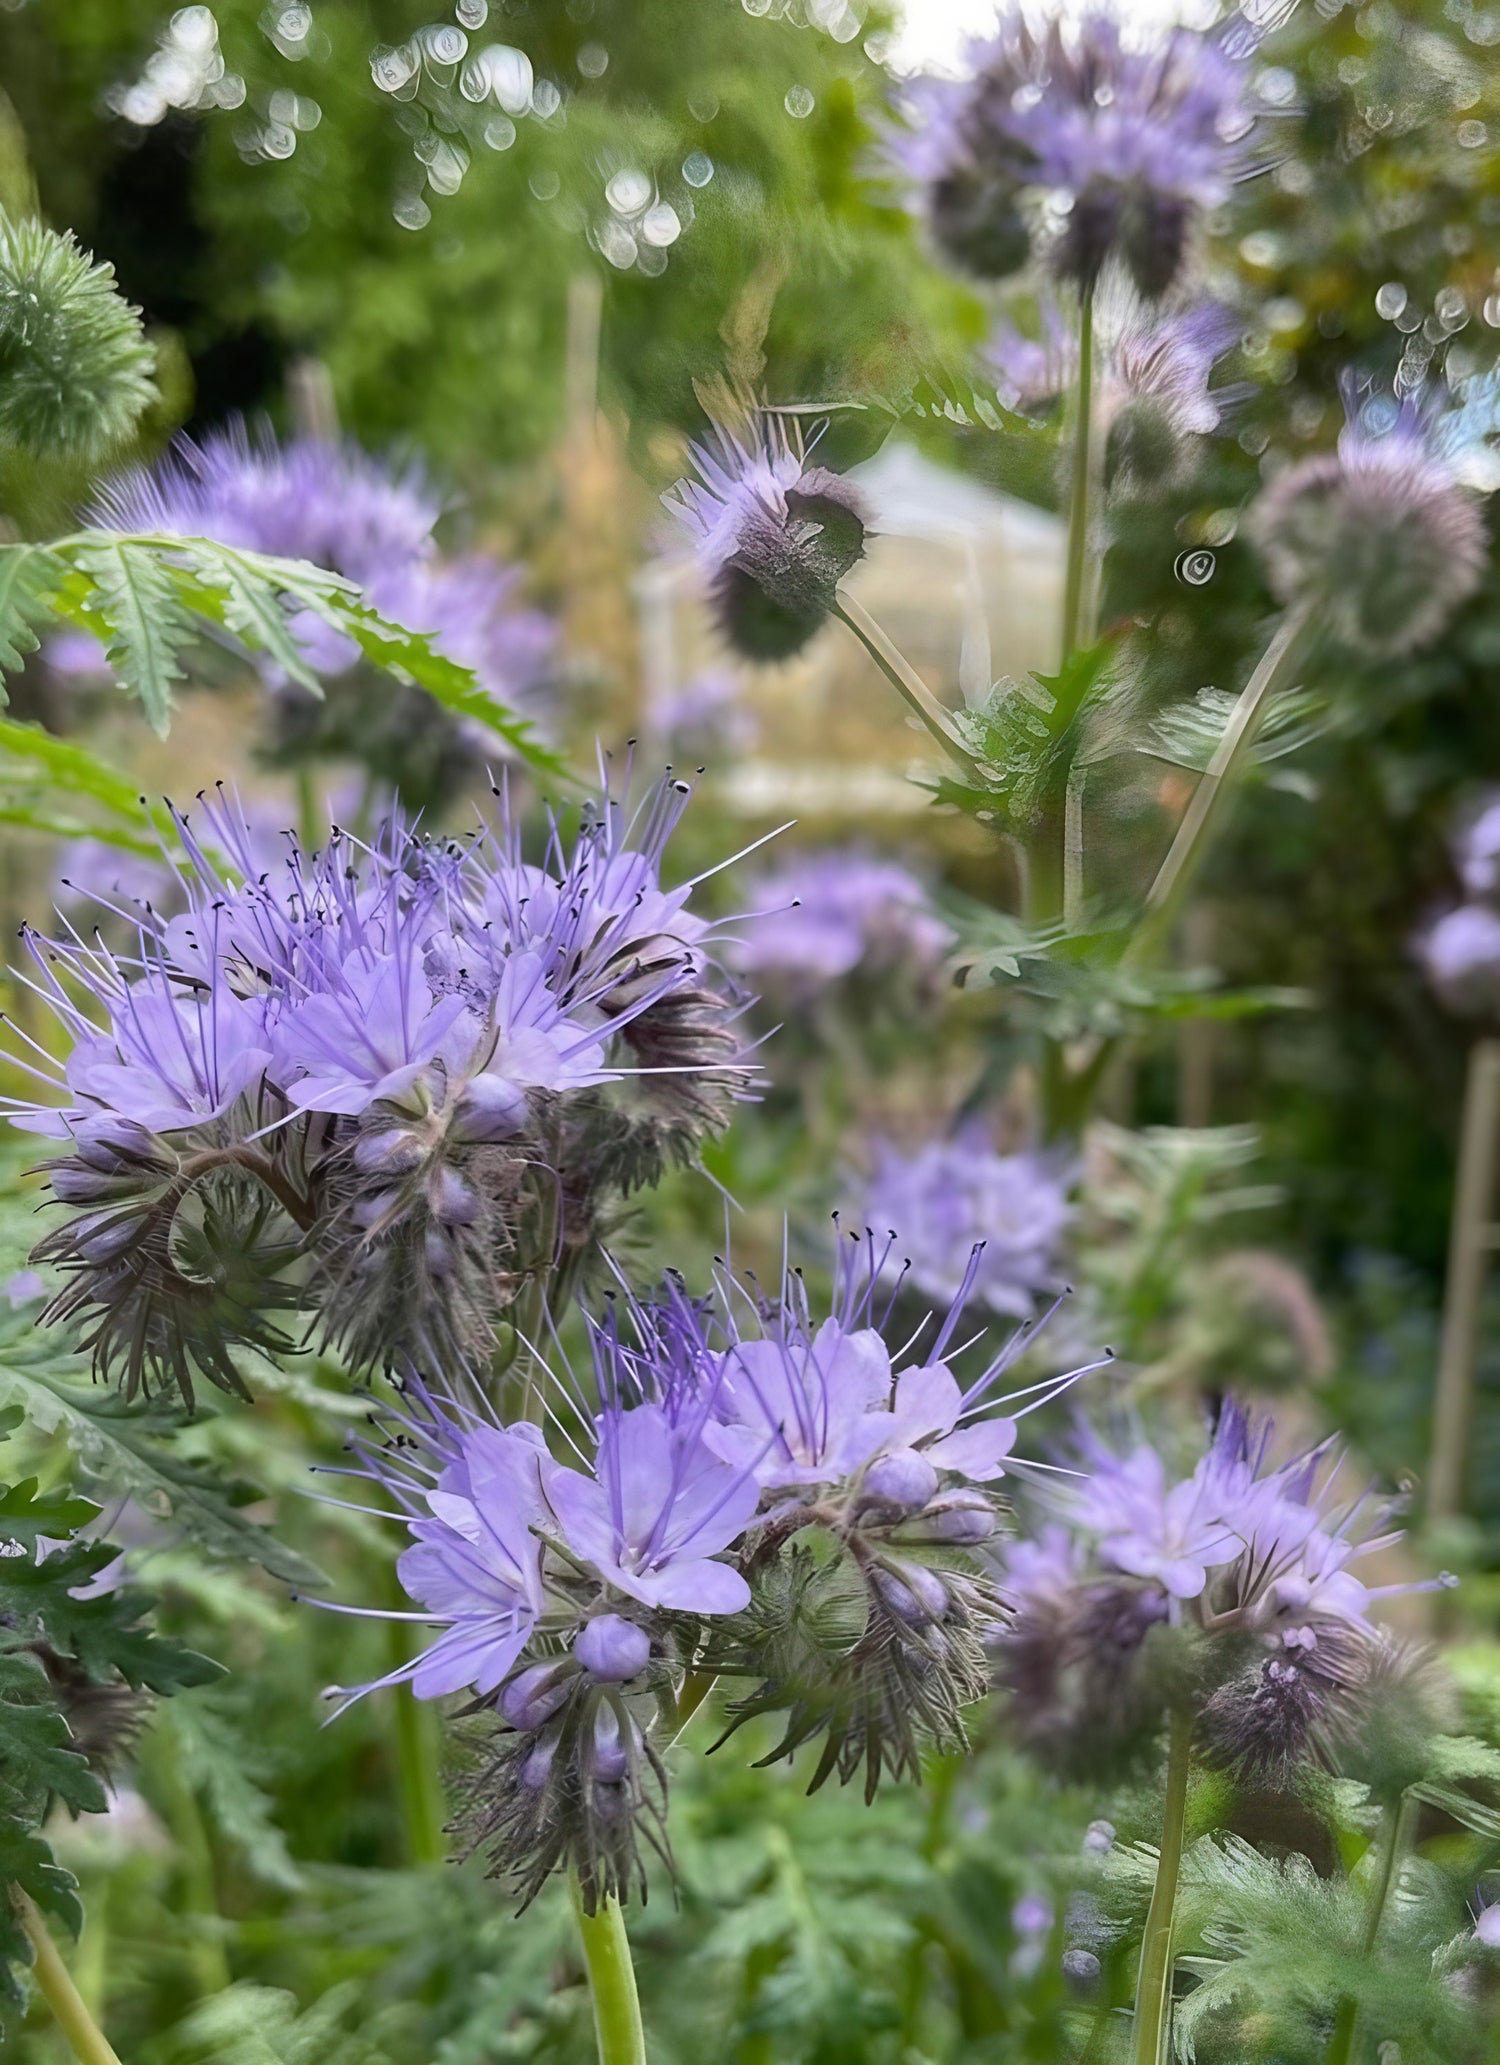 Phacelia tanacetifolia plant with a mix of green leaves and purple blooms